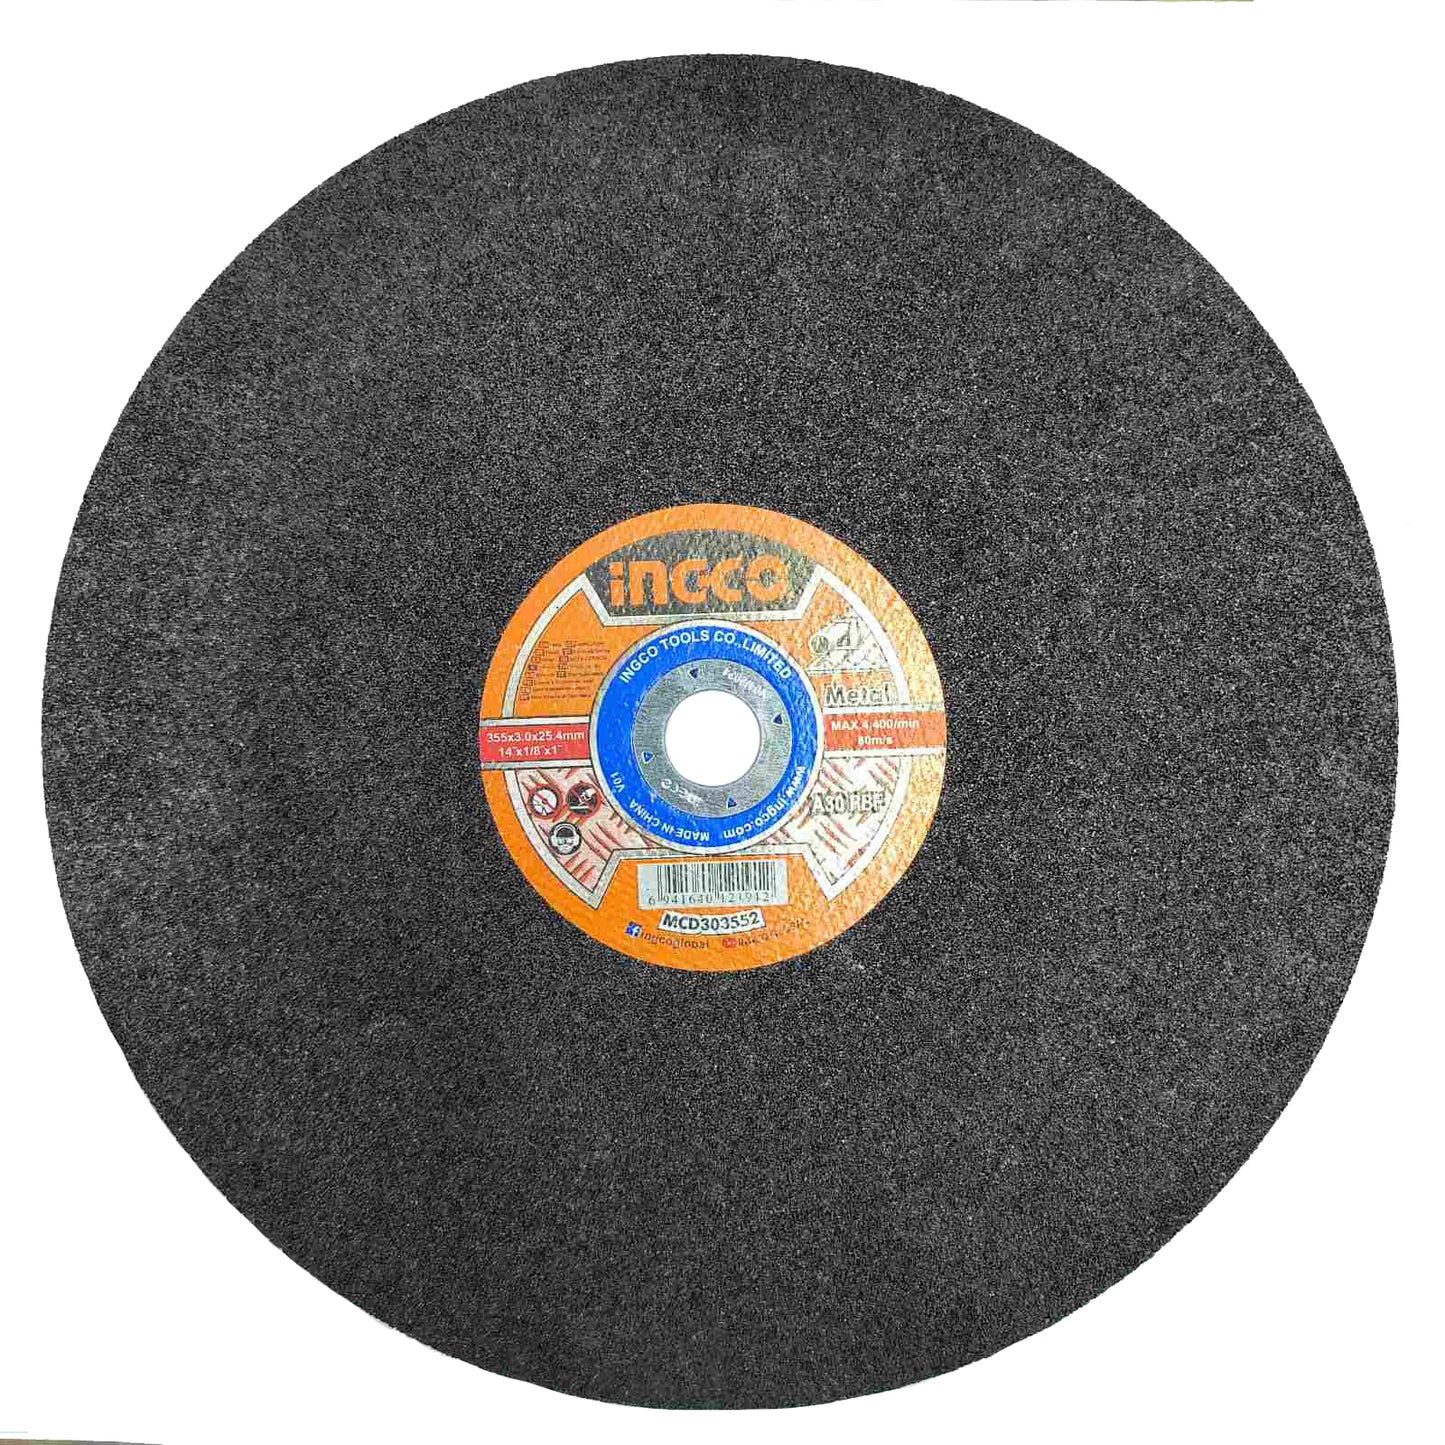 INGCO MCD303552 Abrasive Metal Cutting Disc (355x3x25.4mm) Single Ply and Flat Center for Cut-Off Saw Machine